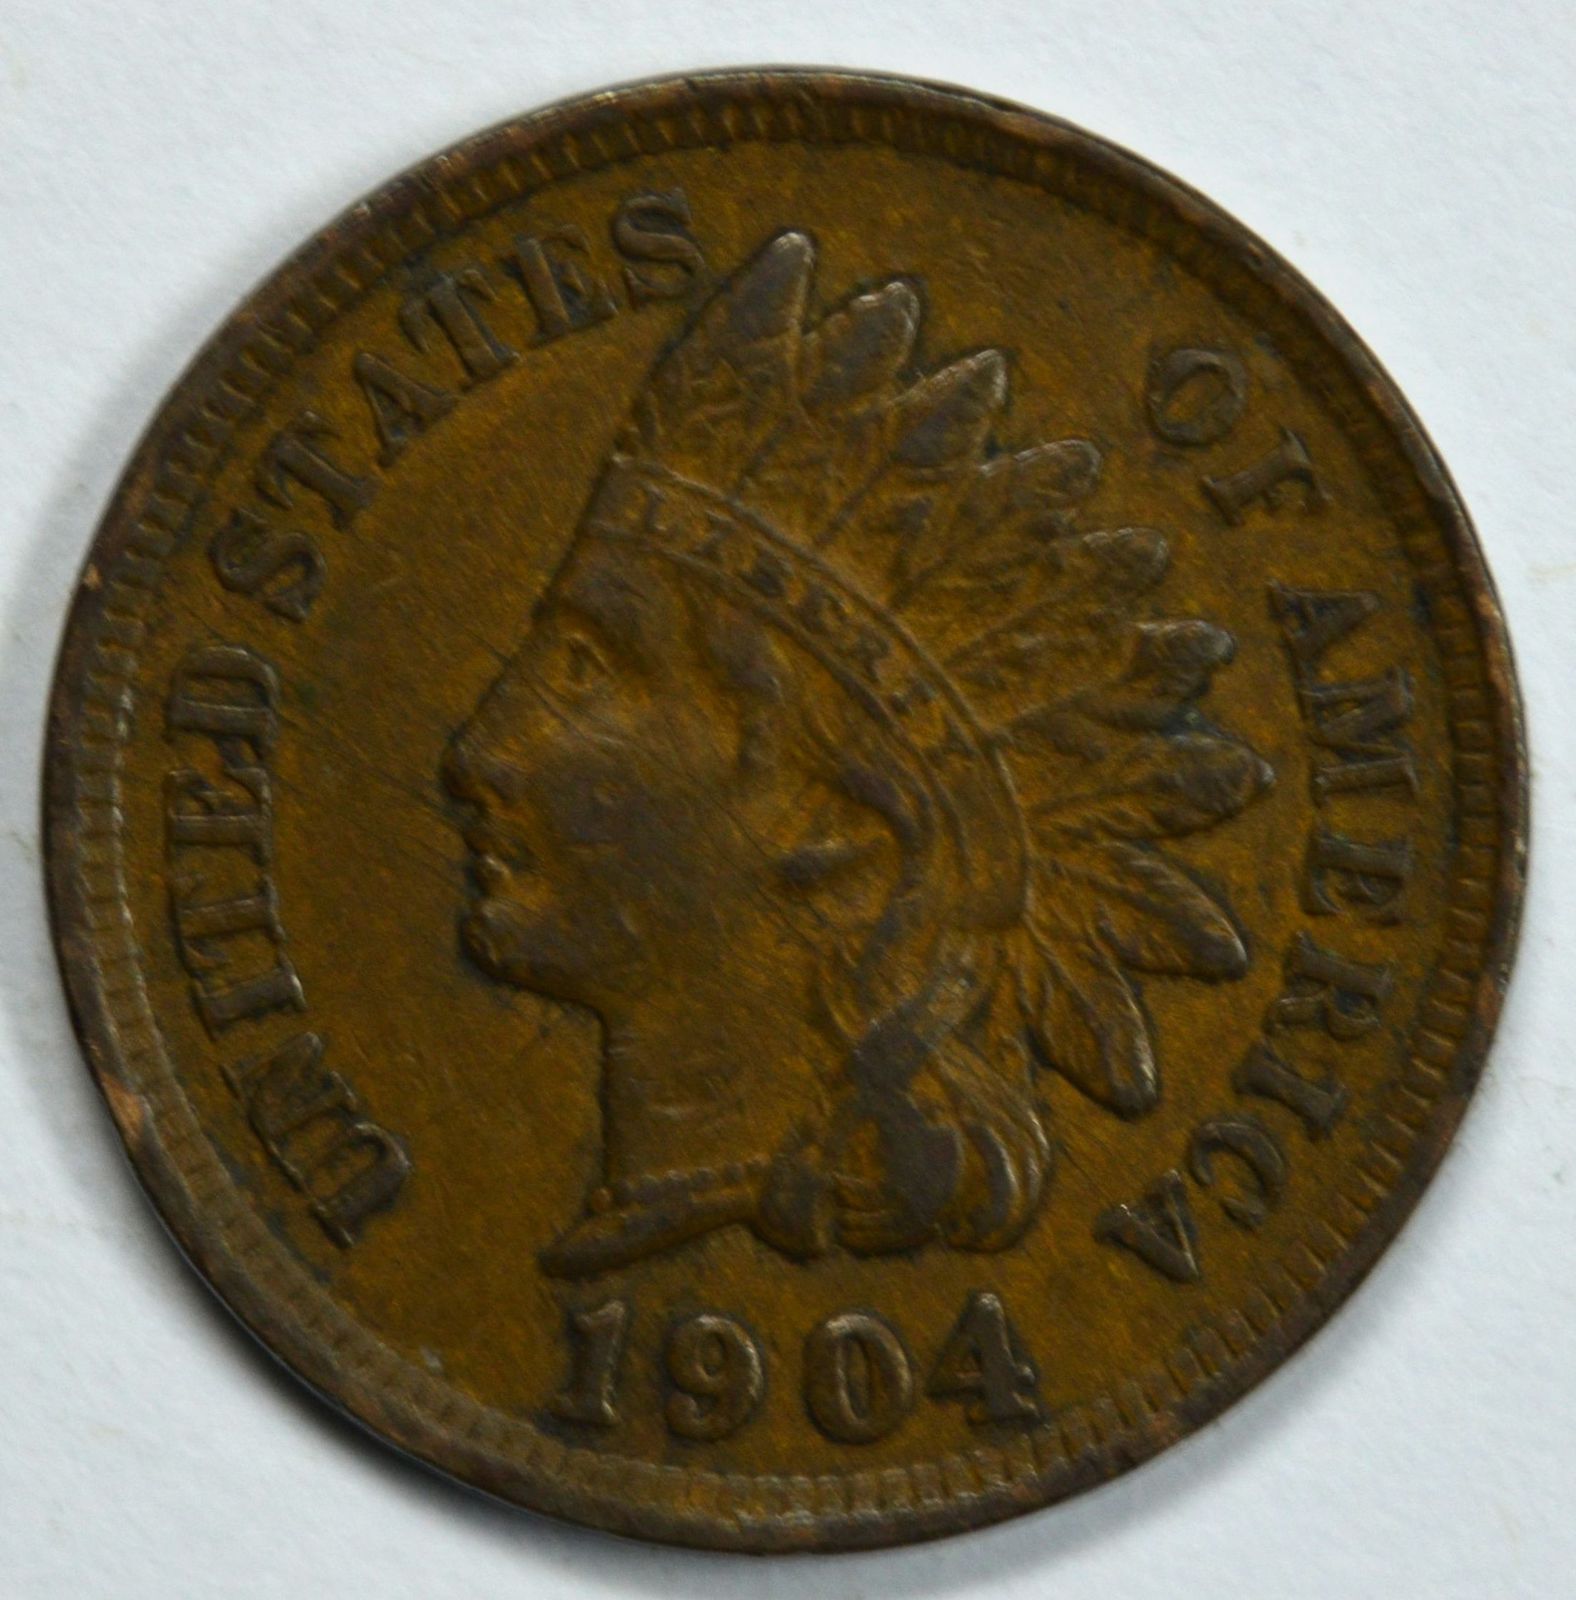 Primary image for 1904 Indian Head circulated penny VF/XF Details